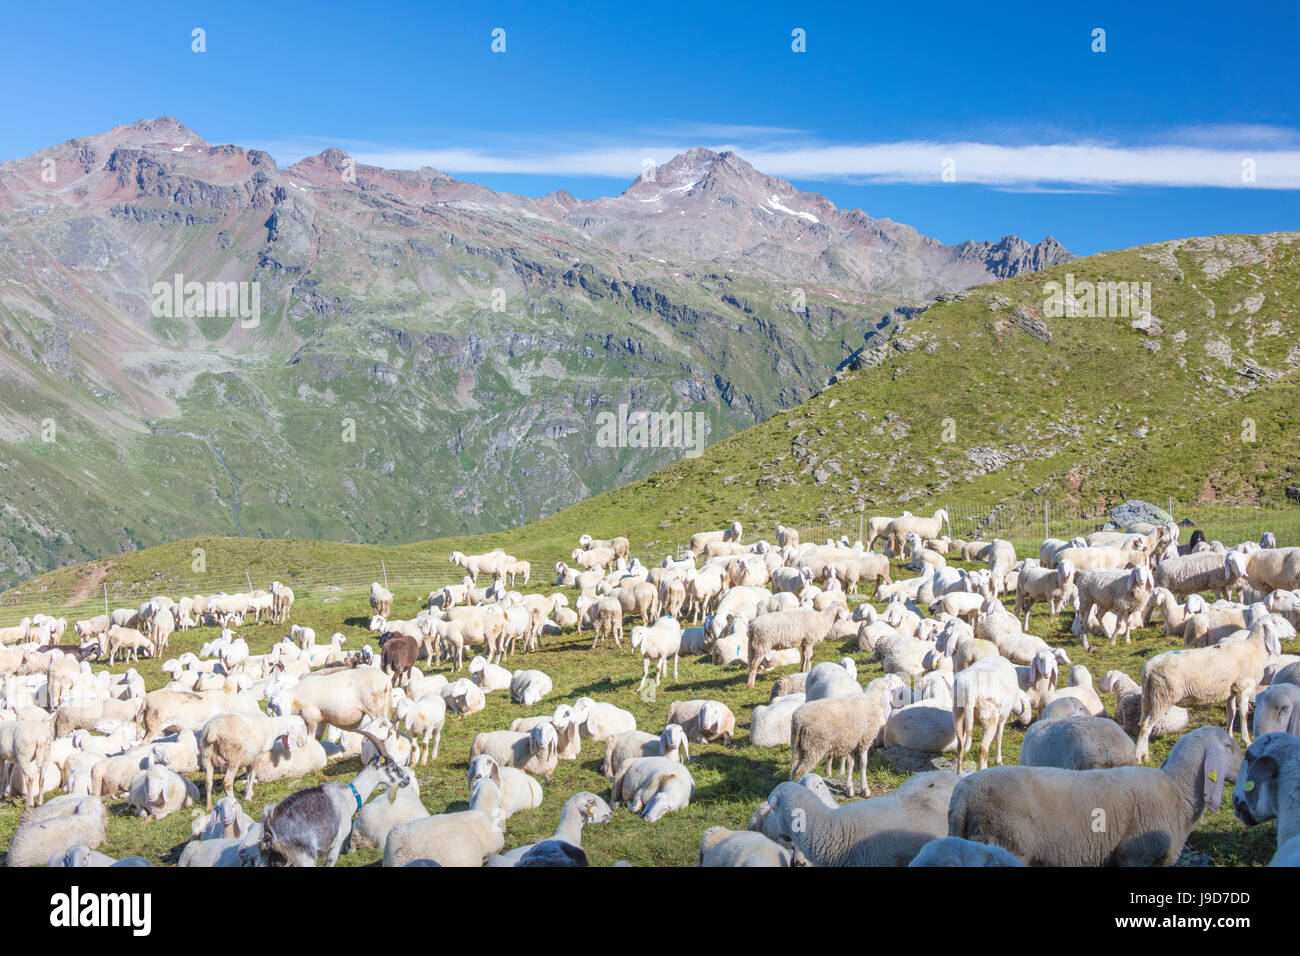 Sheep in the green pastures surrounded by rocky peaks, Val Di Viso, Camonica Valley, province of Brescia, Lombardy, Italy Stock Photo